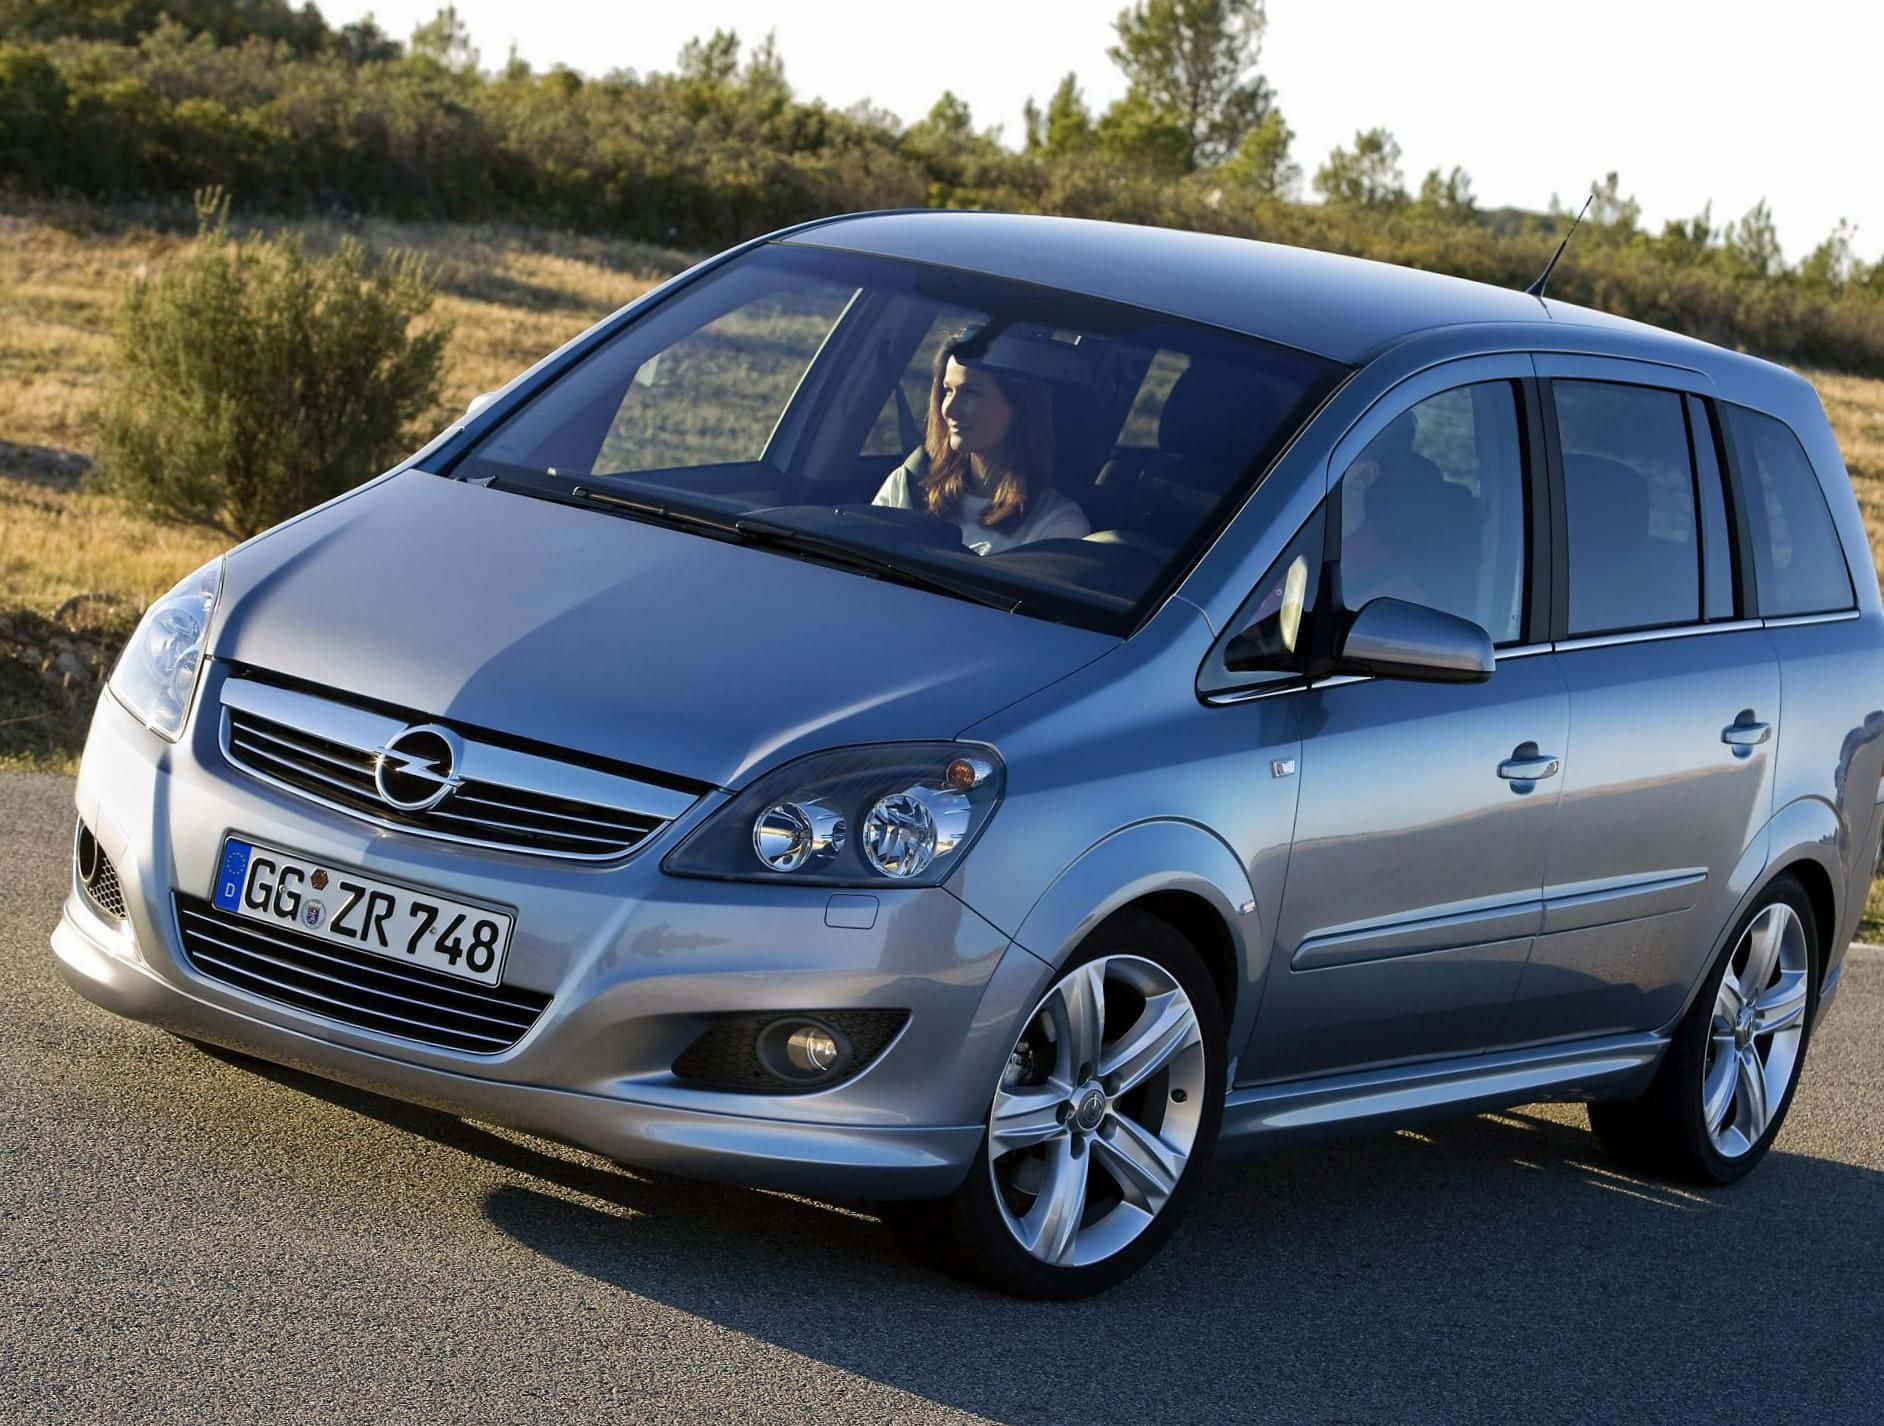 Opel Zafira - Perfect Fusion of Style and Functionality Wallpaper